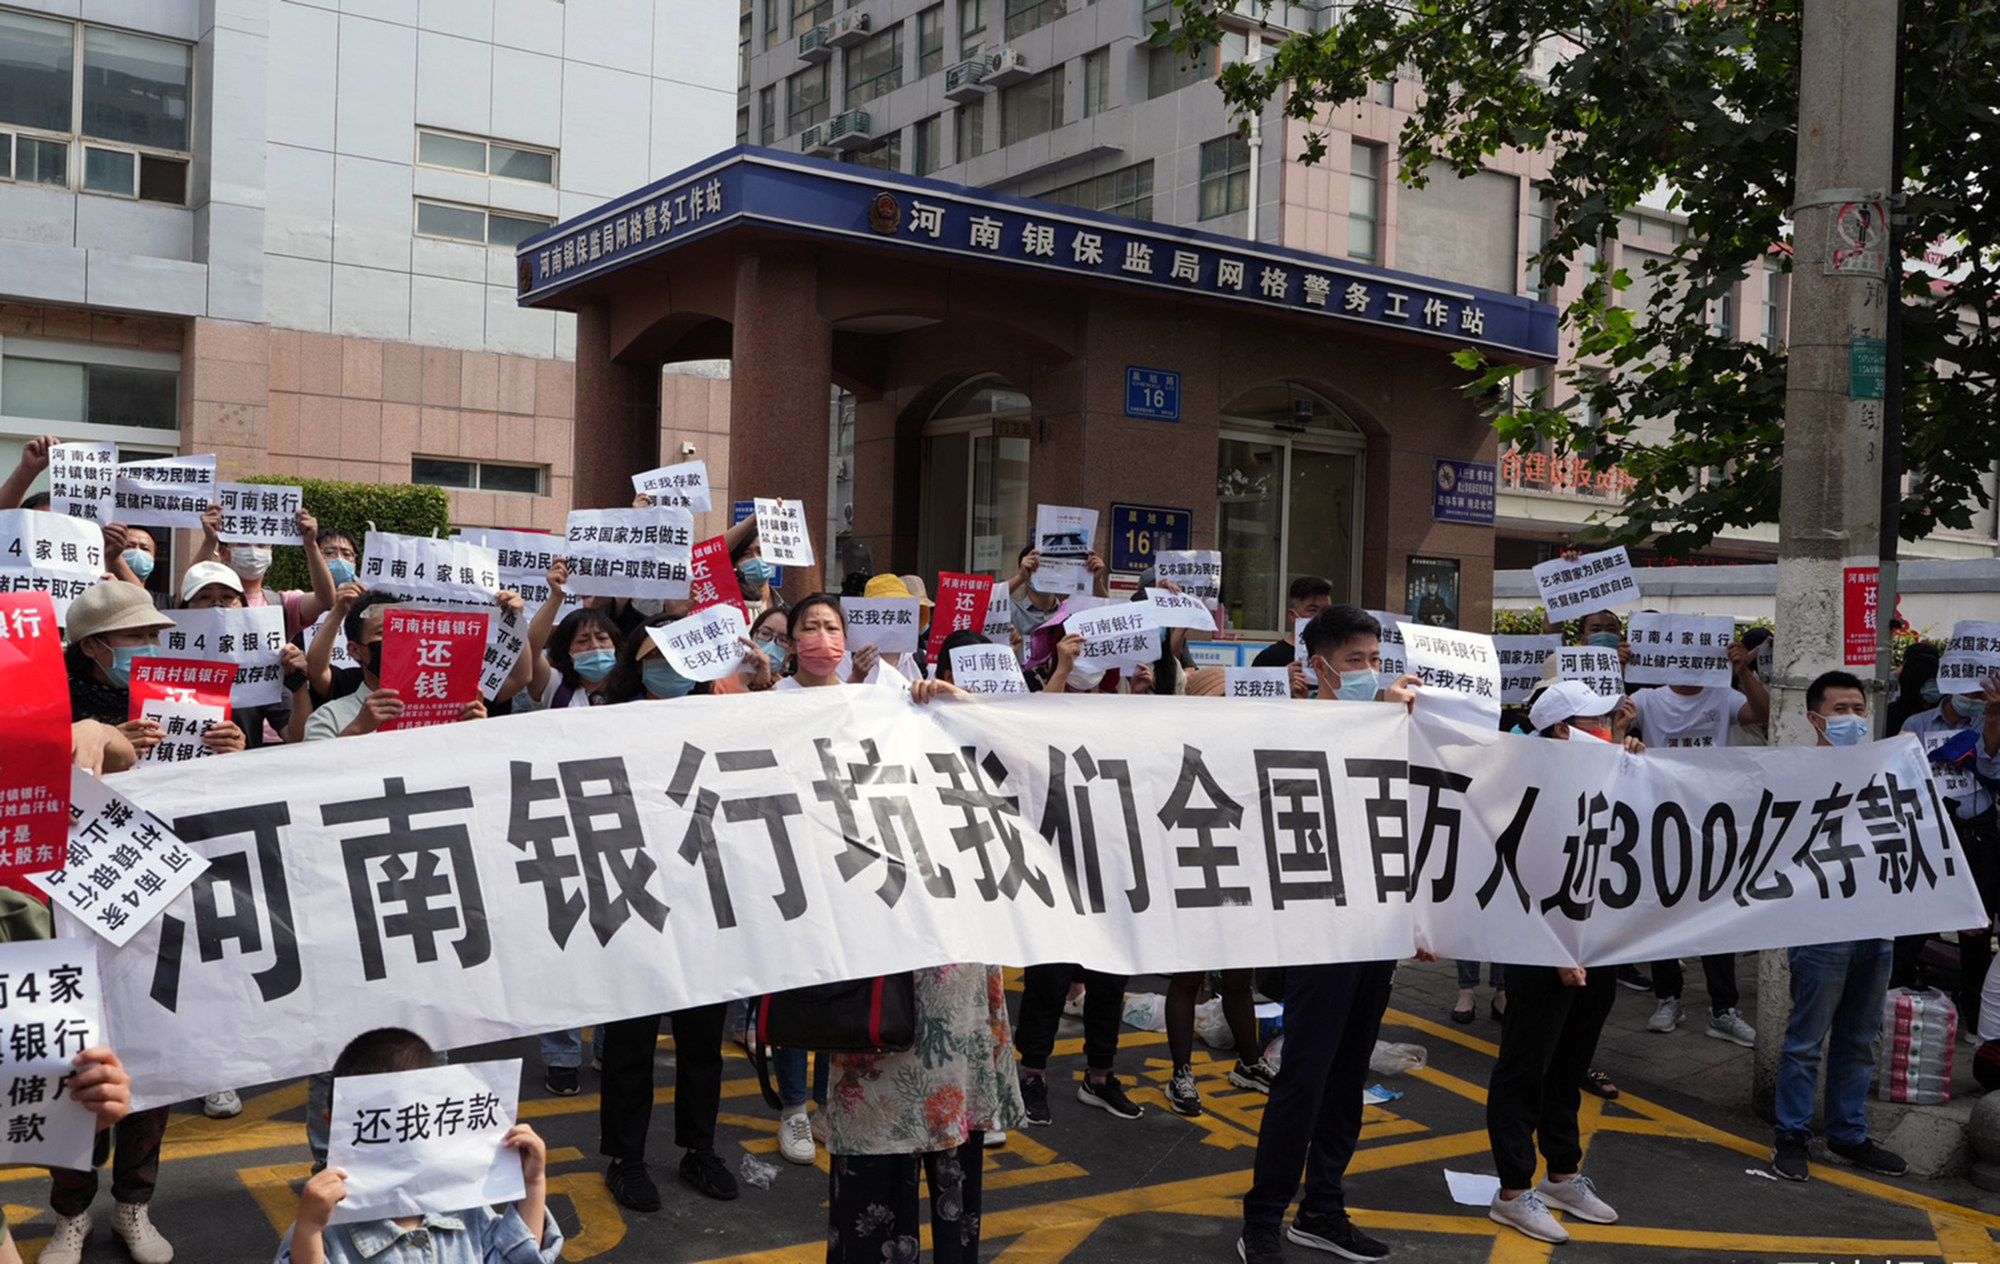 People protest in front of the Henan branch of the China Banking and Insurance Regulatory Commission (CBIRC) demanding “return our money” in Zhengzhou city, central China’s Henan province. Photo: Weibo